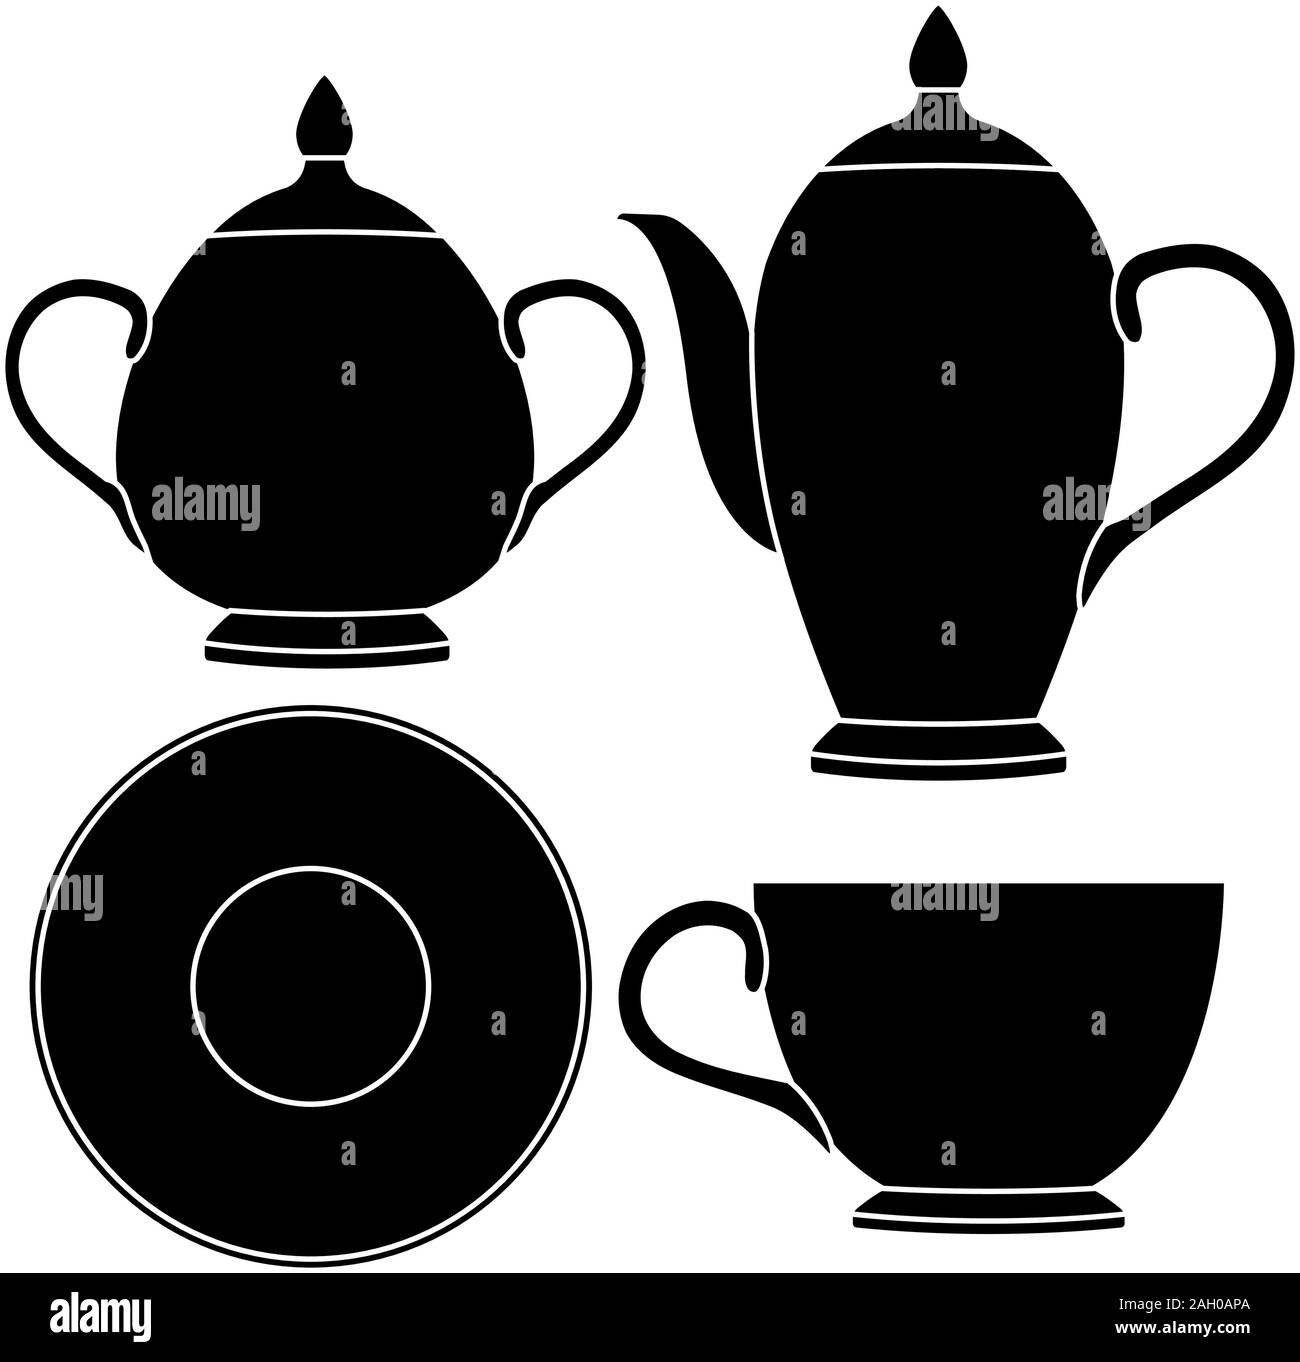 Tea set. Tableware icons. Vector illustration isolated on white background. Stock Vector